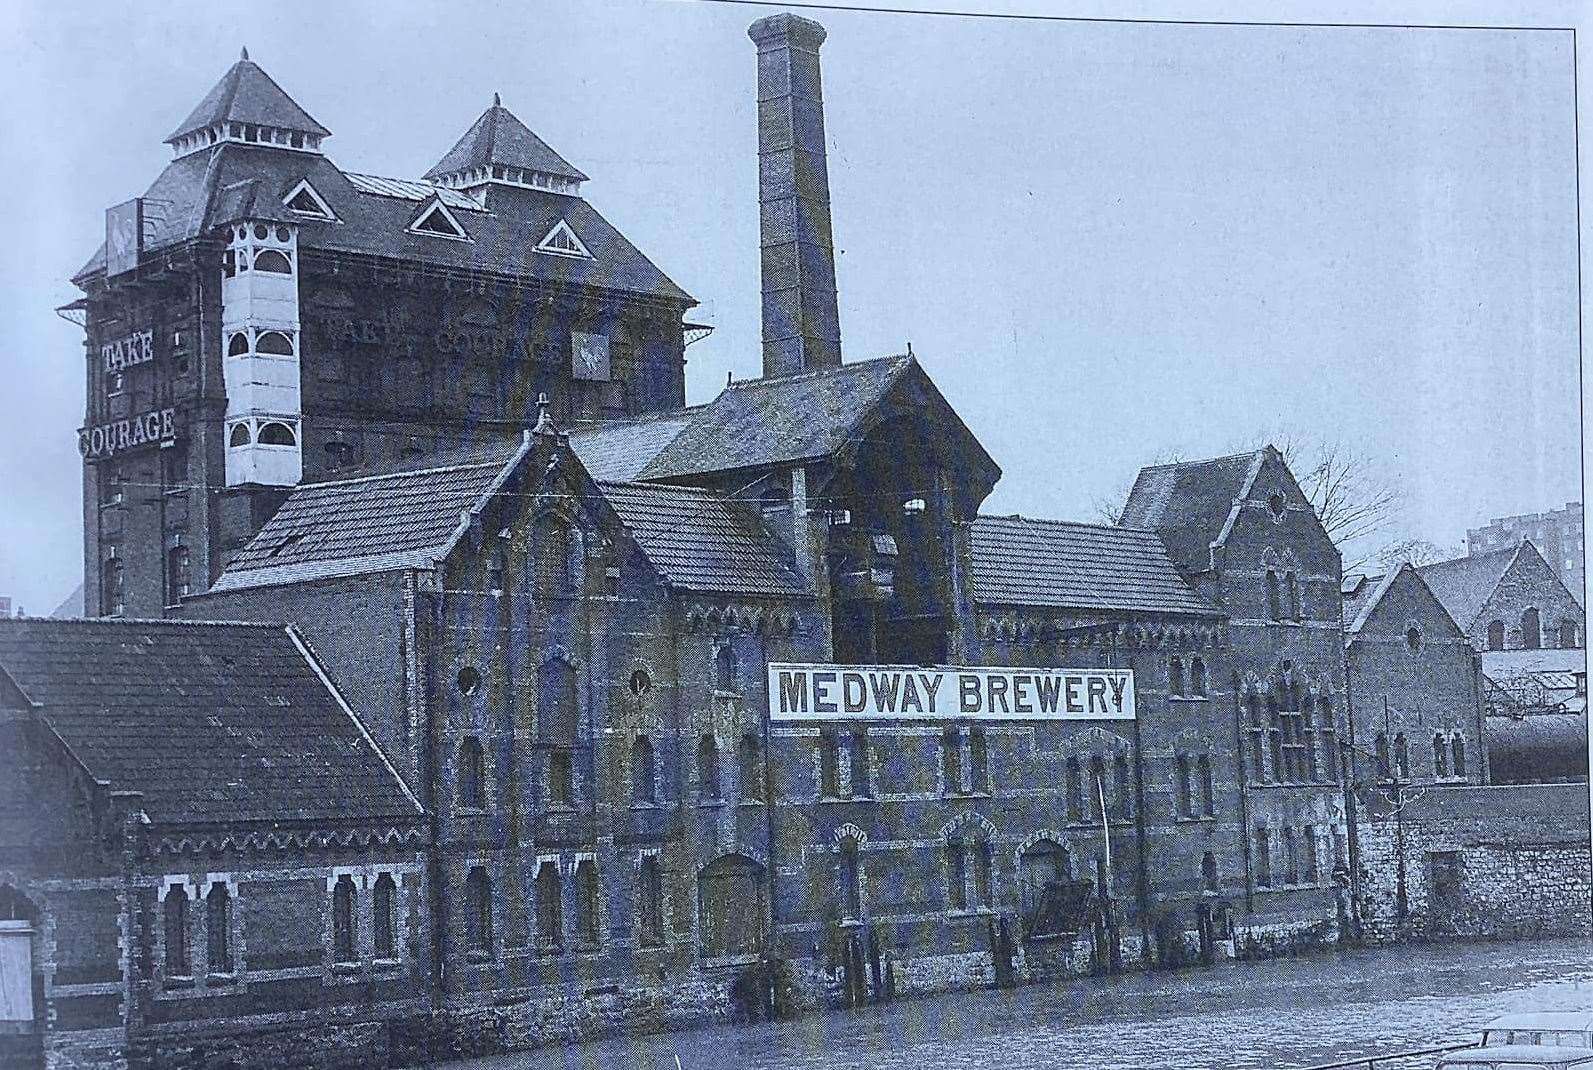 The Medway Brewery finally closed in 1974